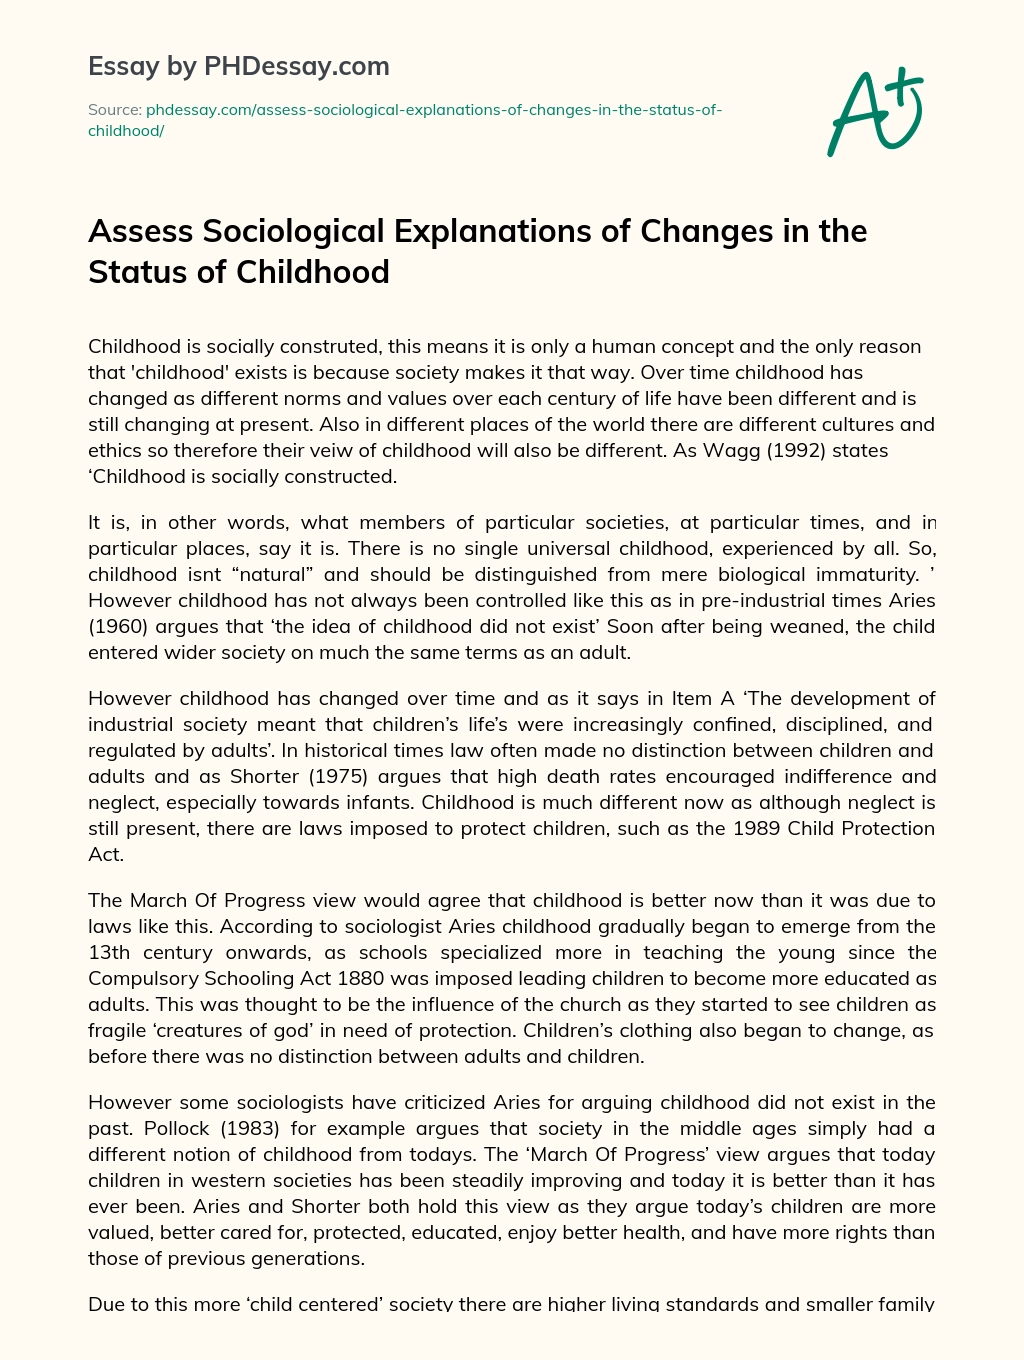 Assess Sociological Explanations of Changes in the Status of Childhood essay